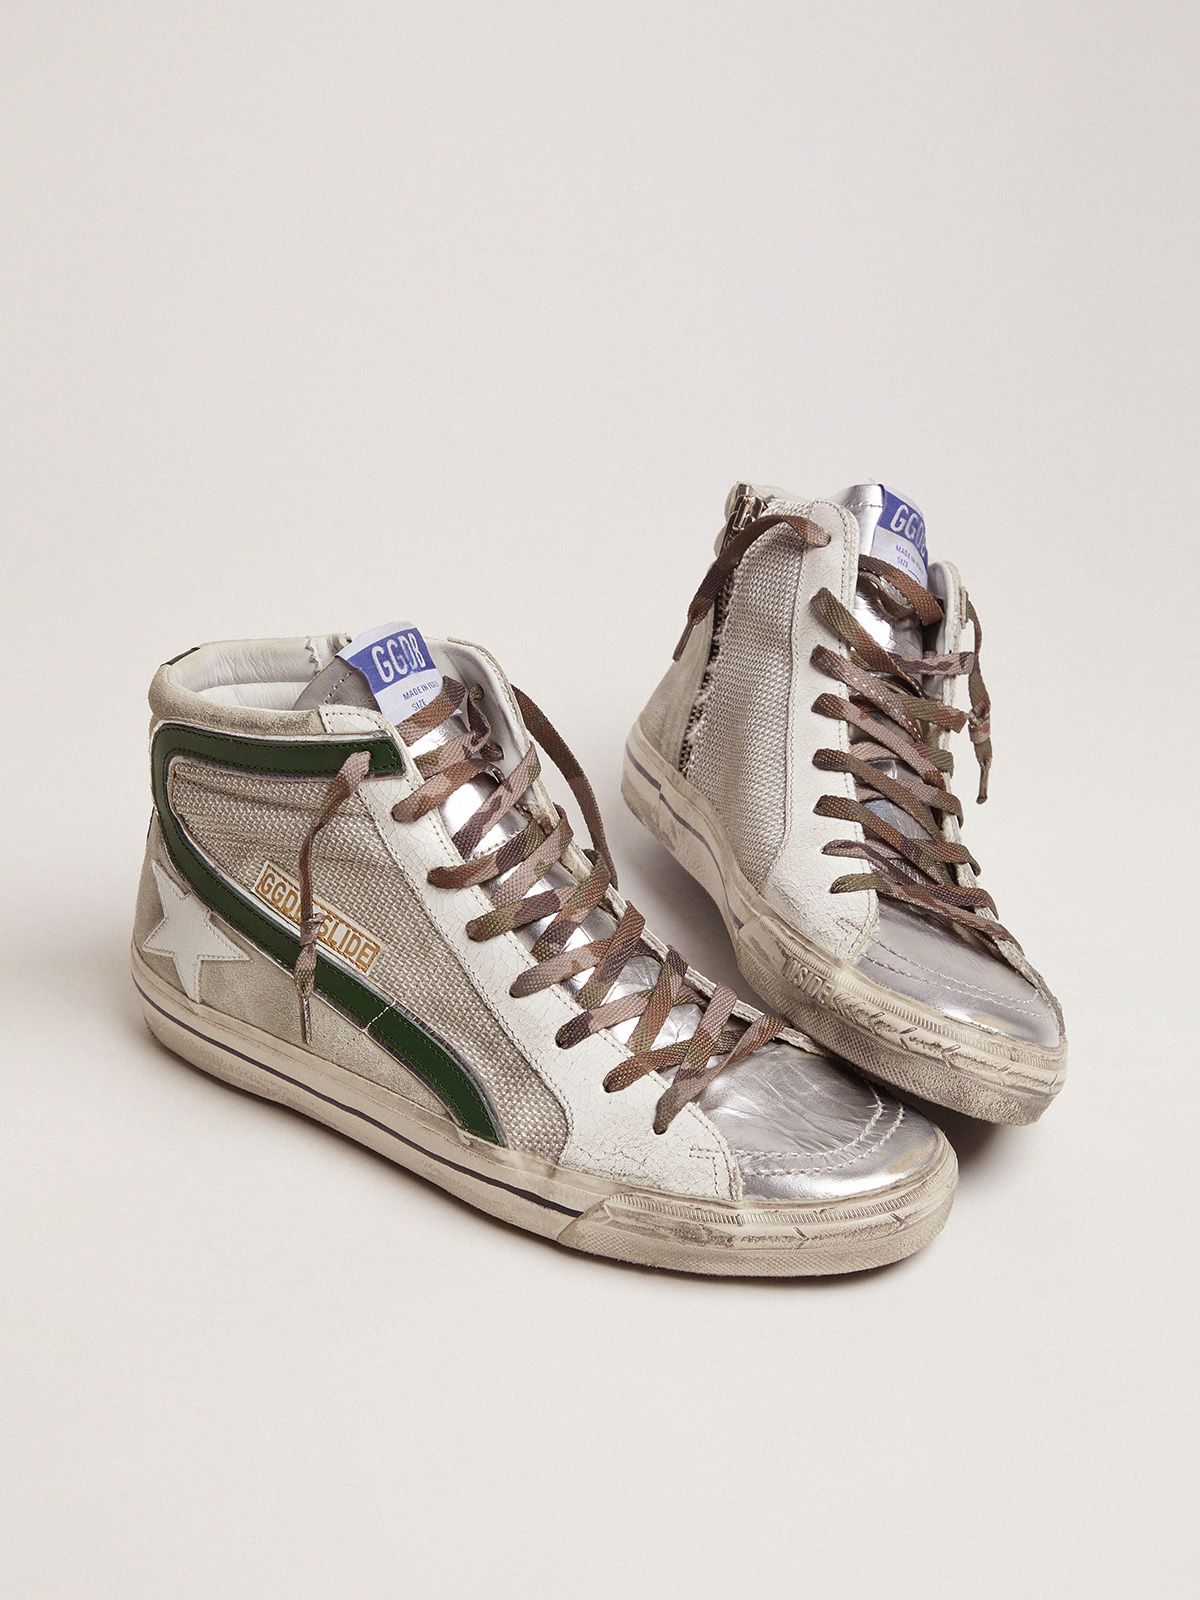 Slide sneakers in leather with green flash | Goose